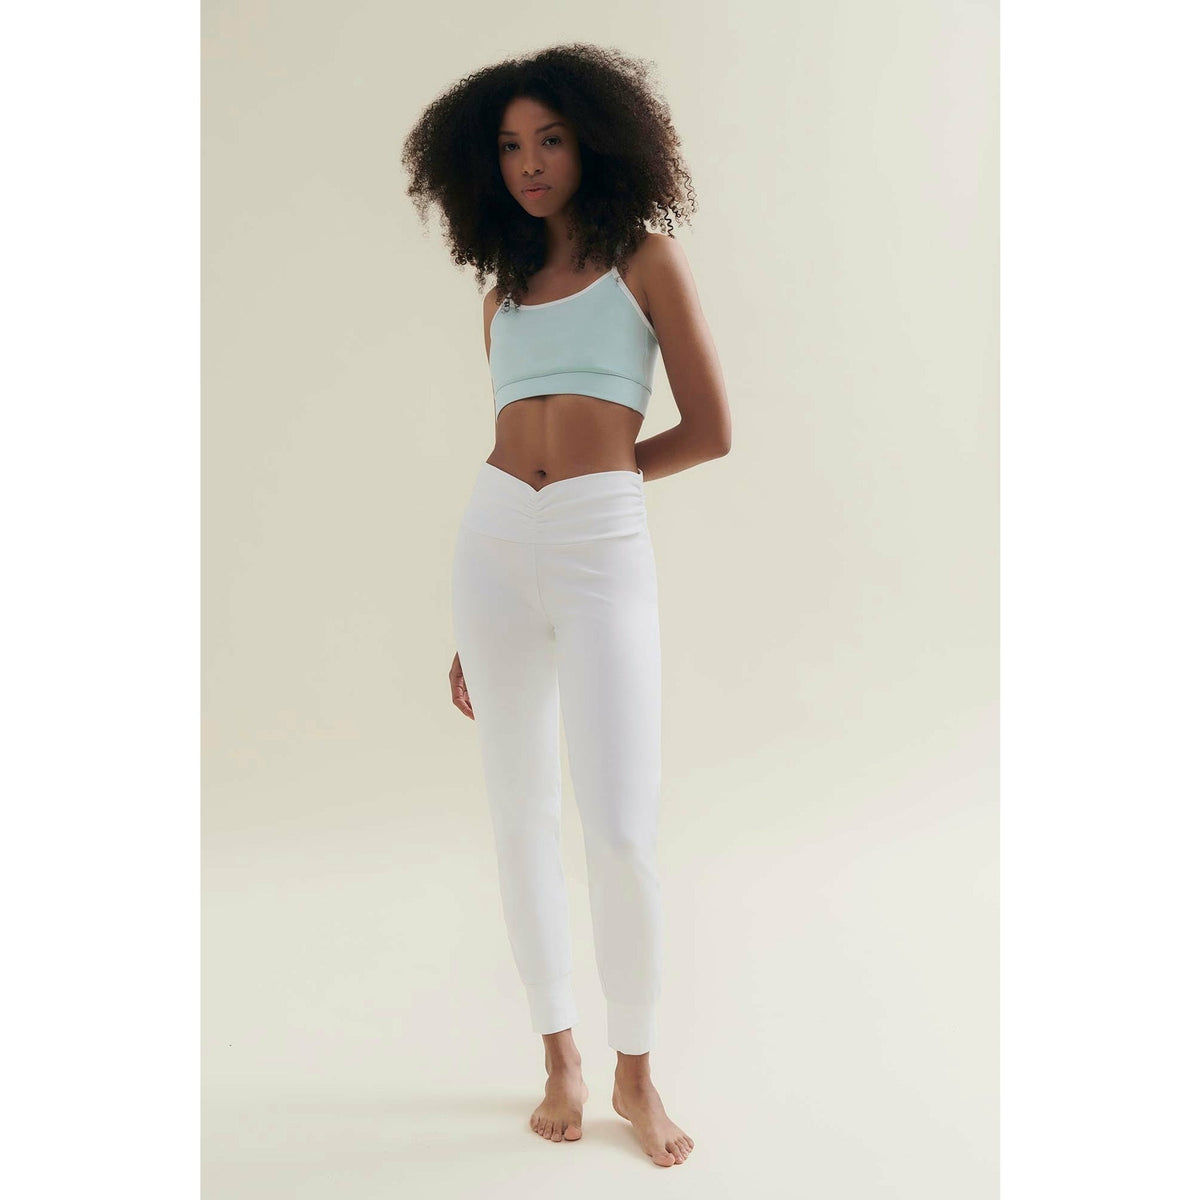 womens yoga pants by wellicious in white worn by a model 